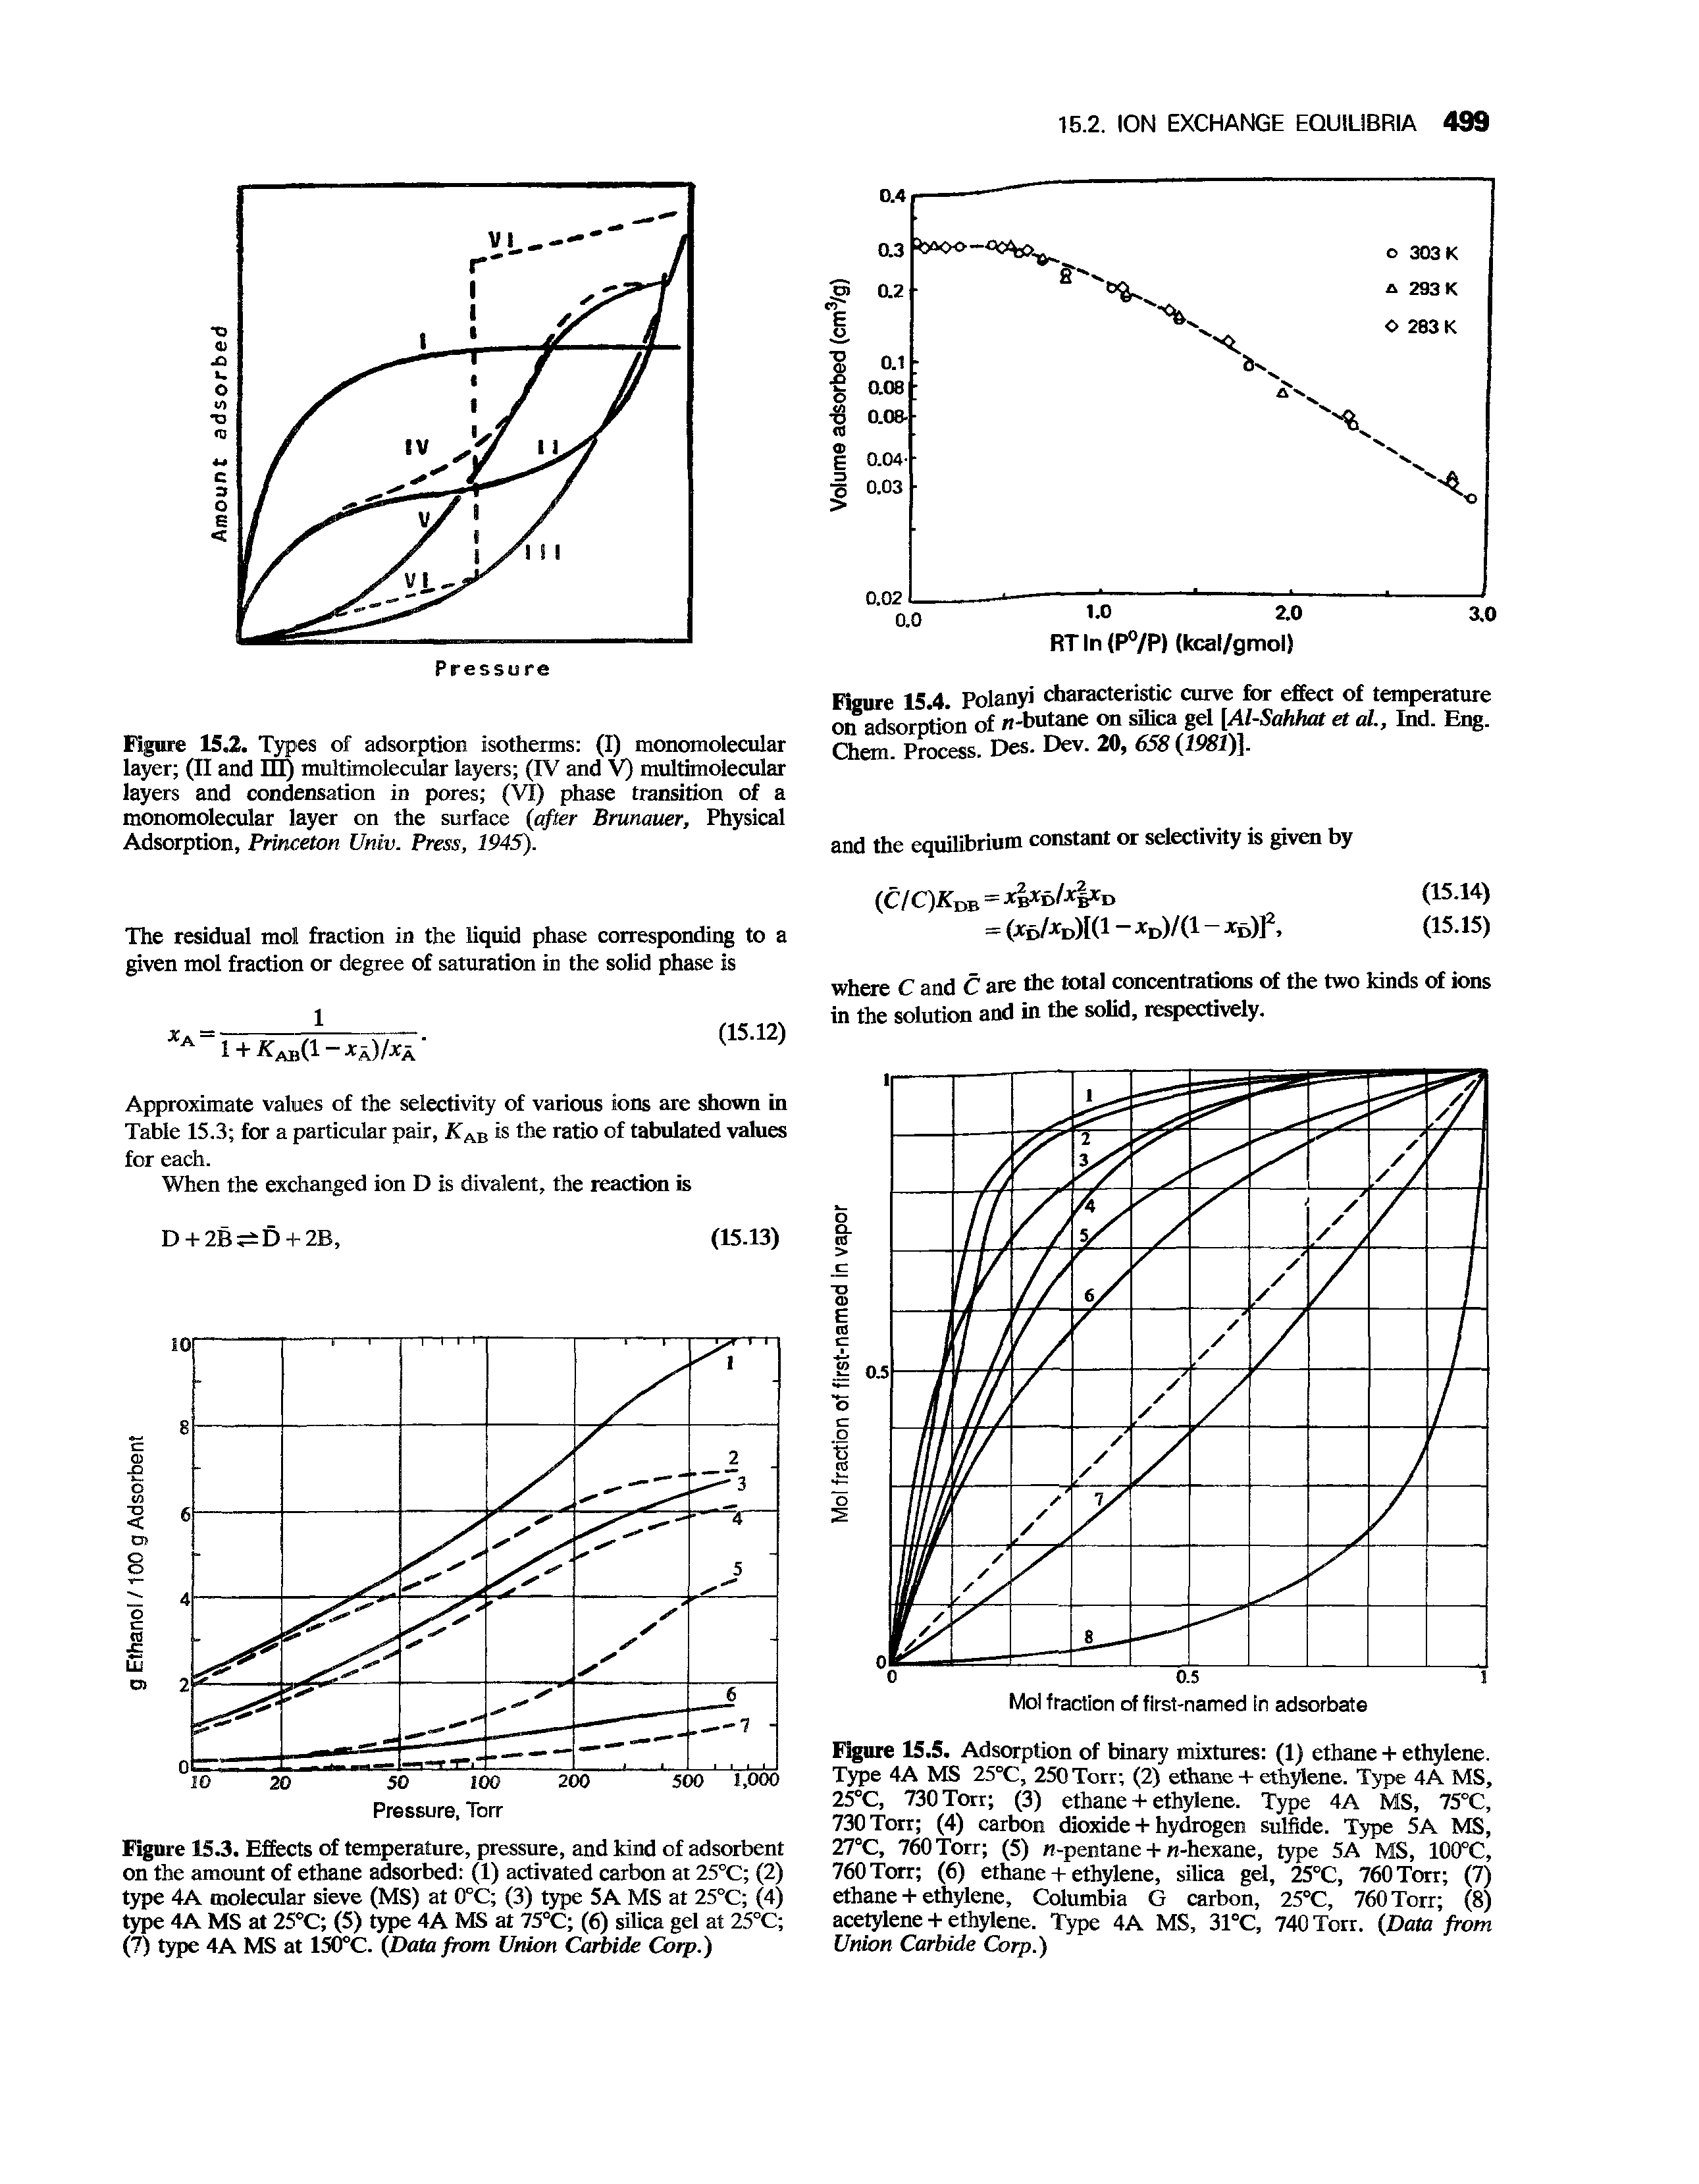 Figure 15.4. Polanyi characteristic curve for effect of temperature on adsorption of n-butane on silica gel [Al-Sahhat et al., Ind. Eng. Chem. Process. Des. Dev. 20, 658 (1981)].